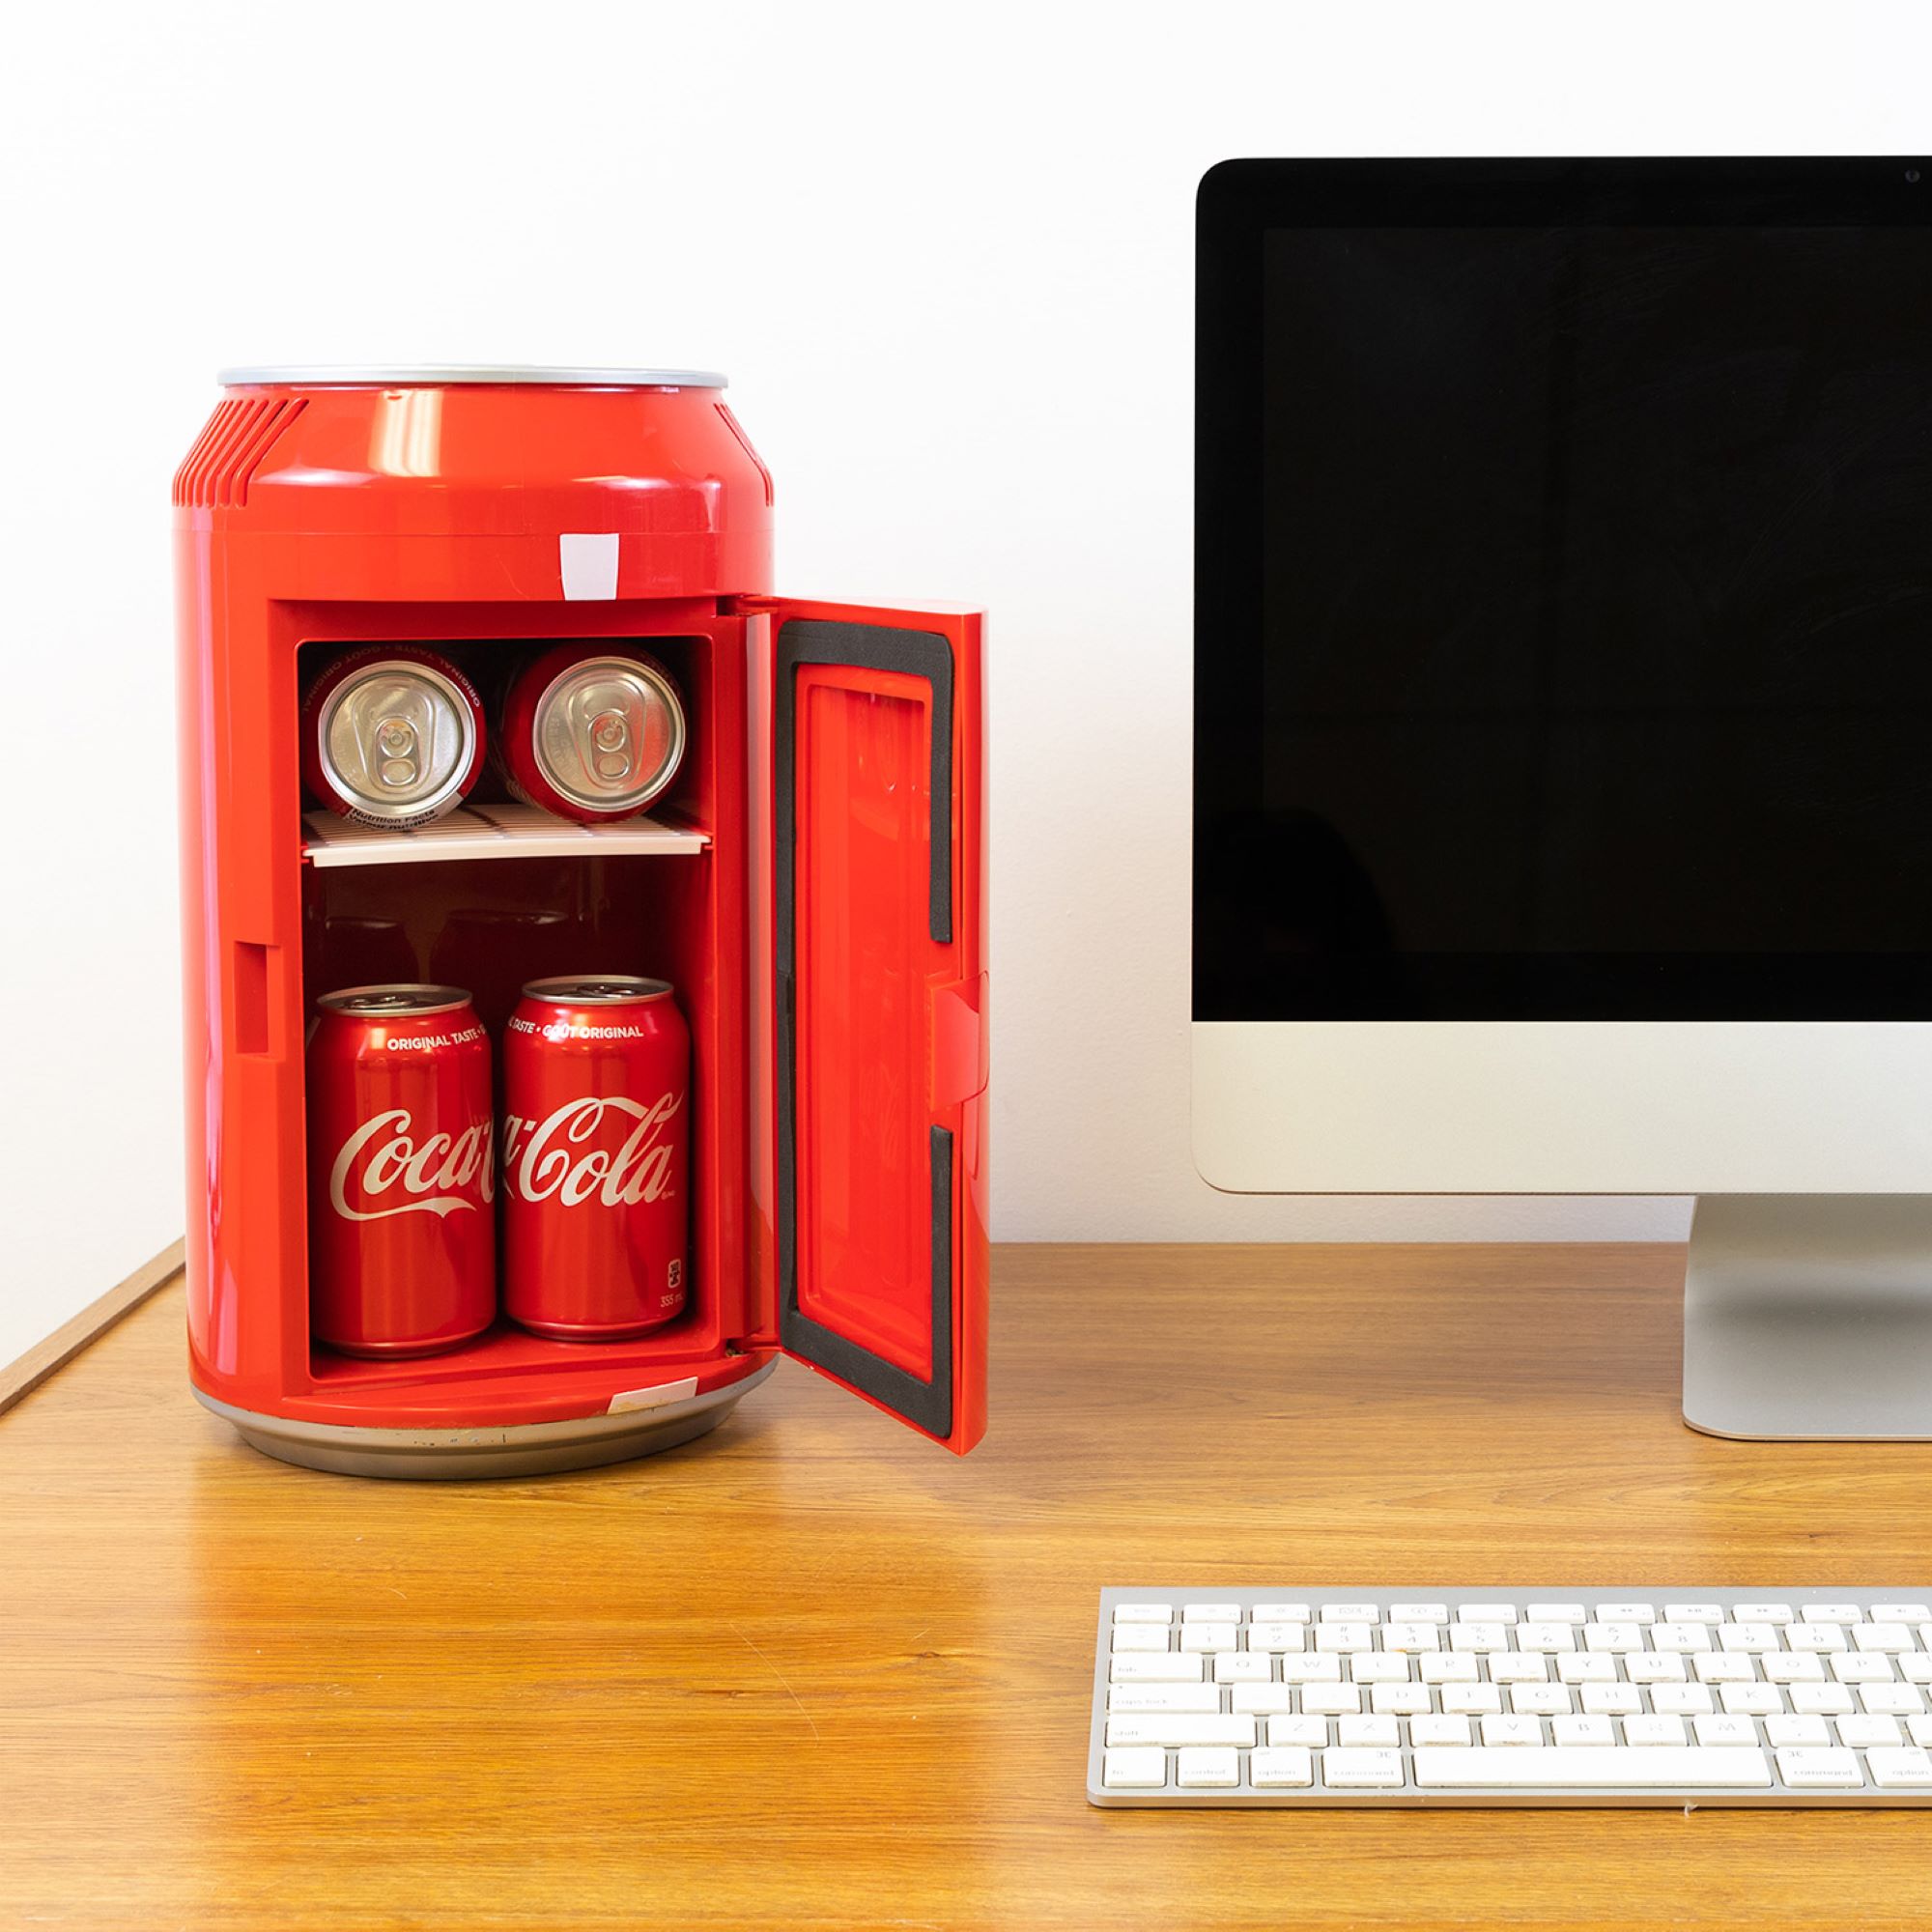 Coca-Cola 8 Can Portable Mini Fridge, 5.4L (5.7 qt) Compact Personal Travel Fridge for Snacks Lunch Drinks Cosmetics, Includes 12V and AC Cords, Cute Desk Accessory for Home Office Dorm Travel, Red - image 4 of 8